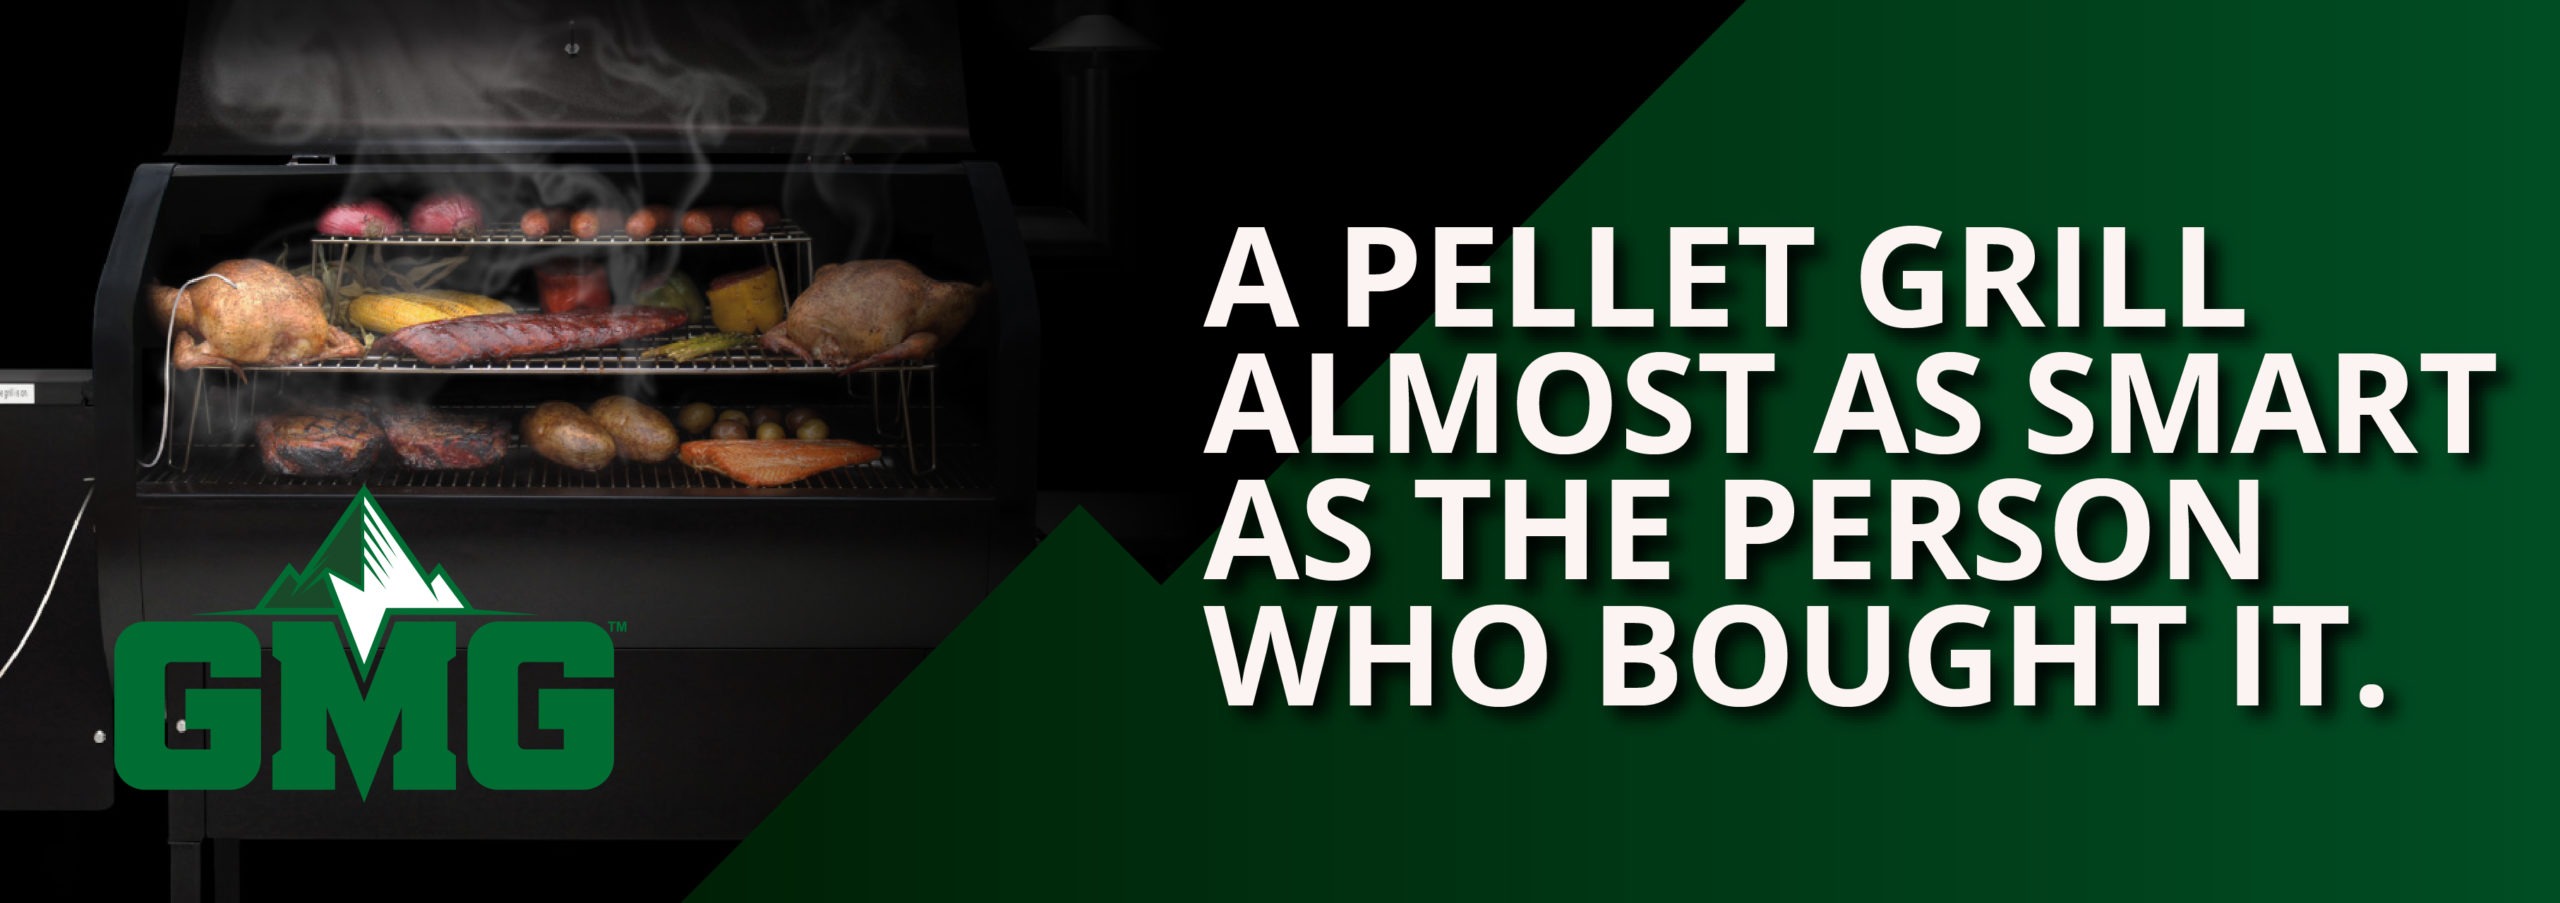 A pellet grill almost as smart as the person who bought it.